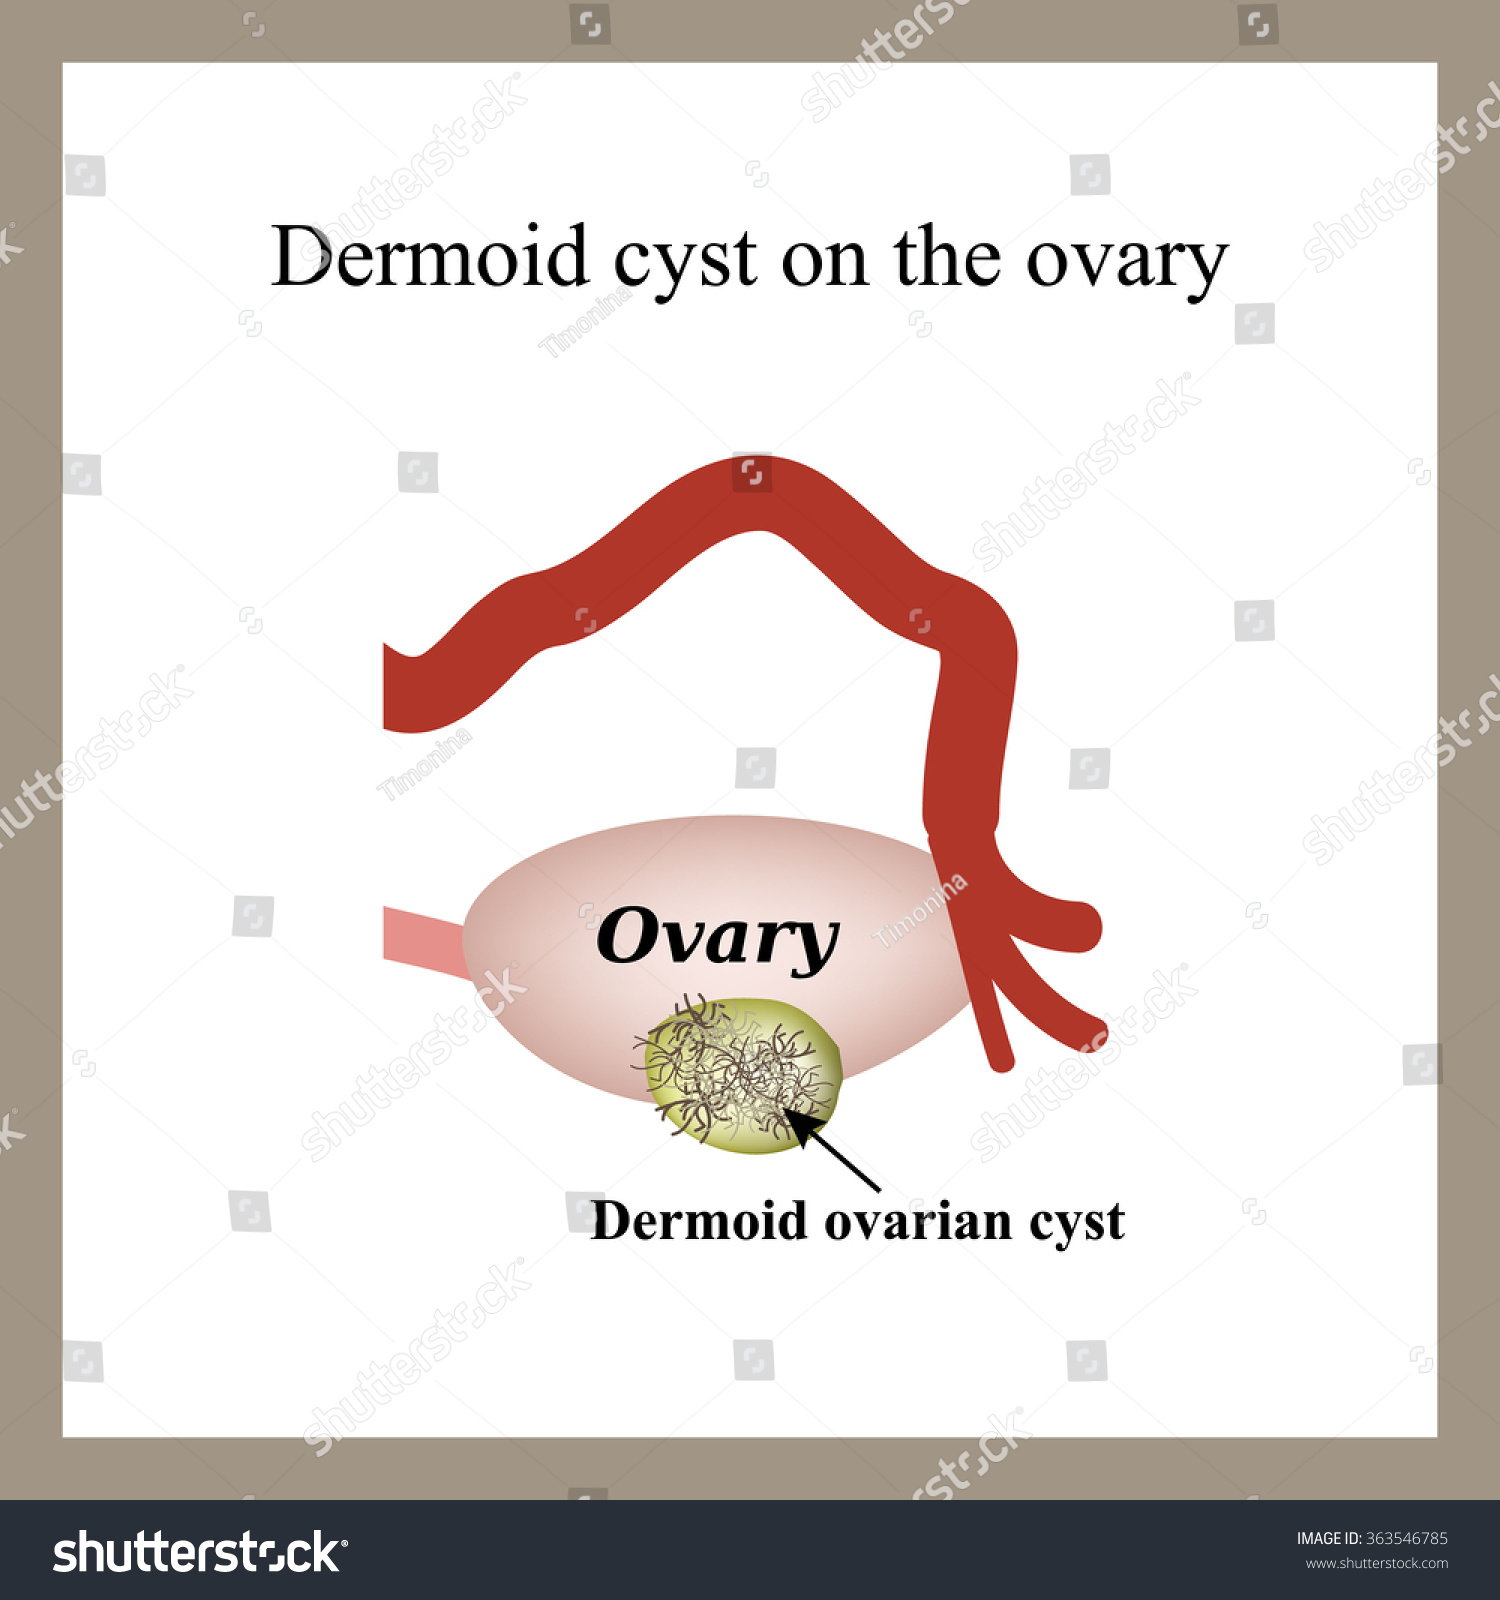 Dermoid Cyst On Ovary Ovary Infographics Stock Vector (Royalty Free ...